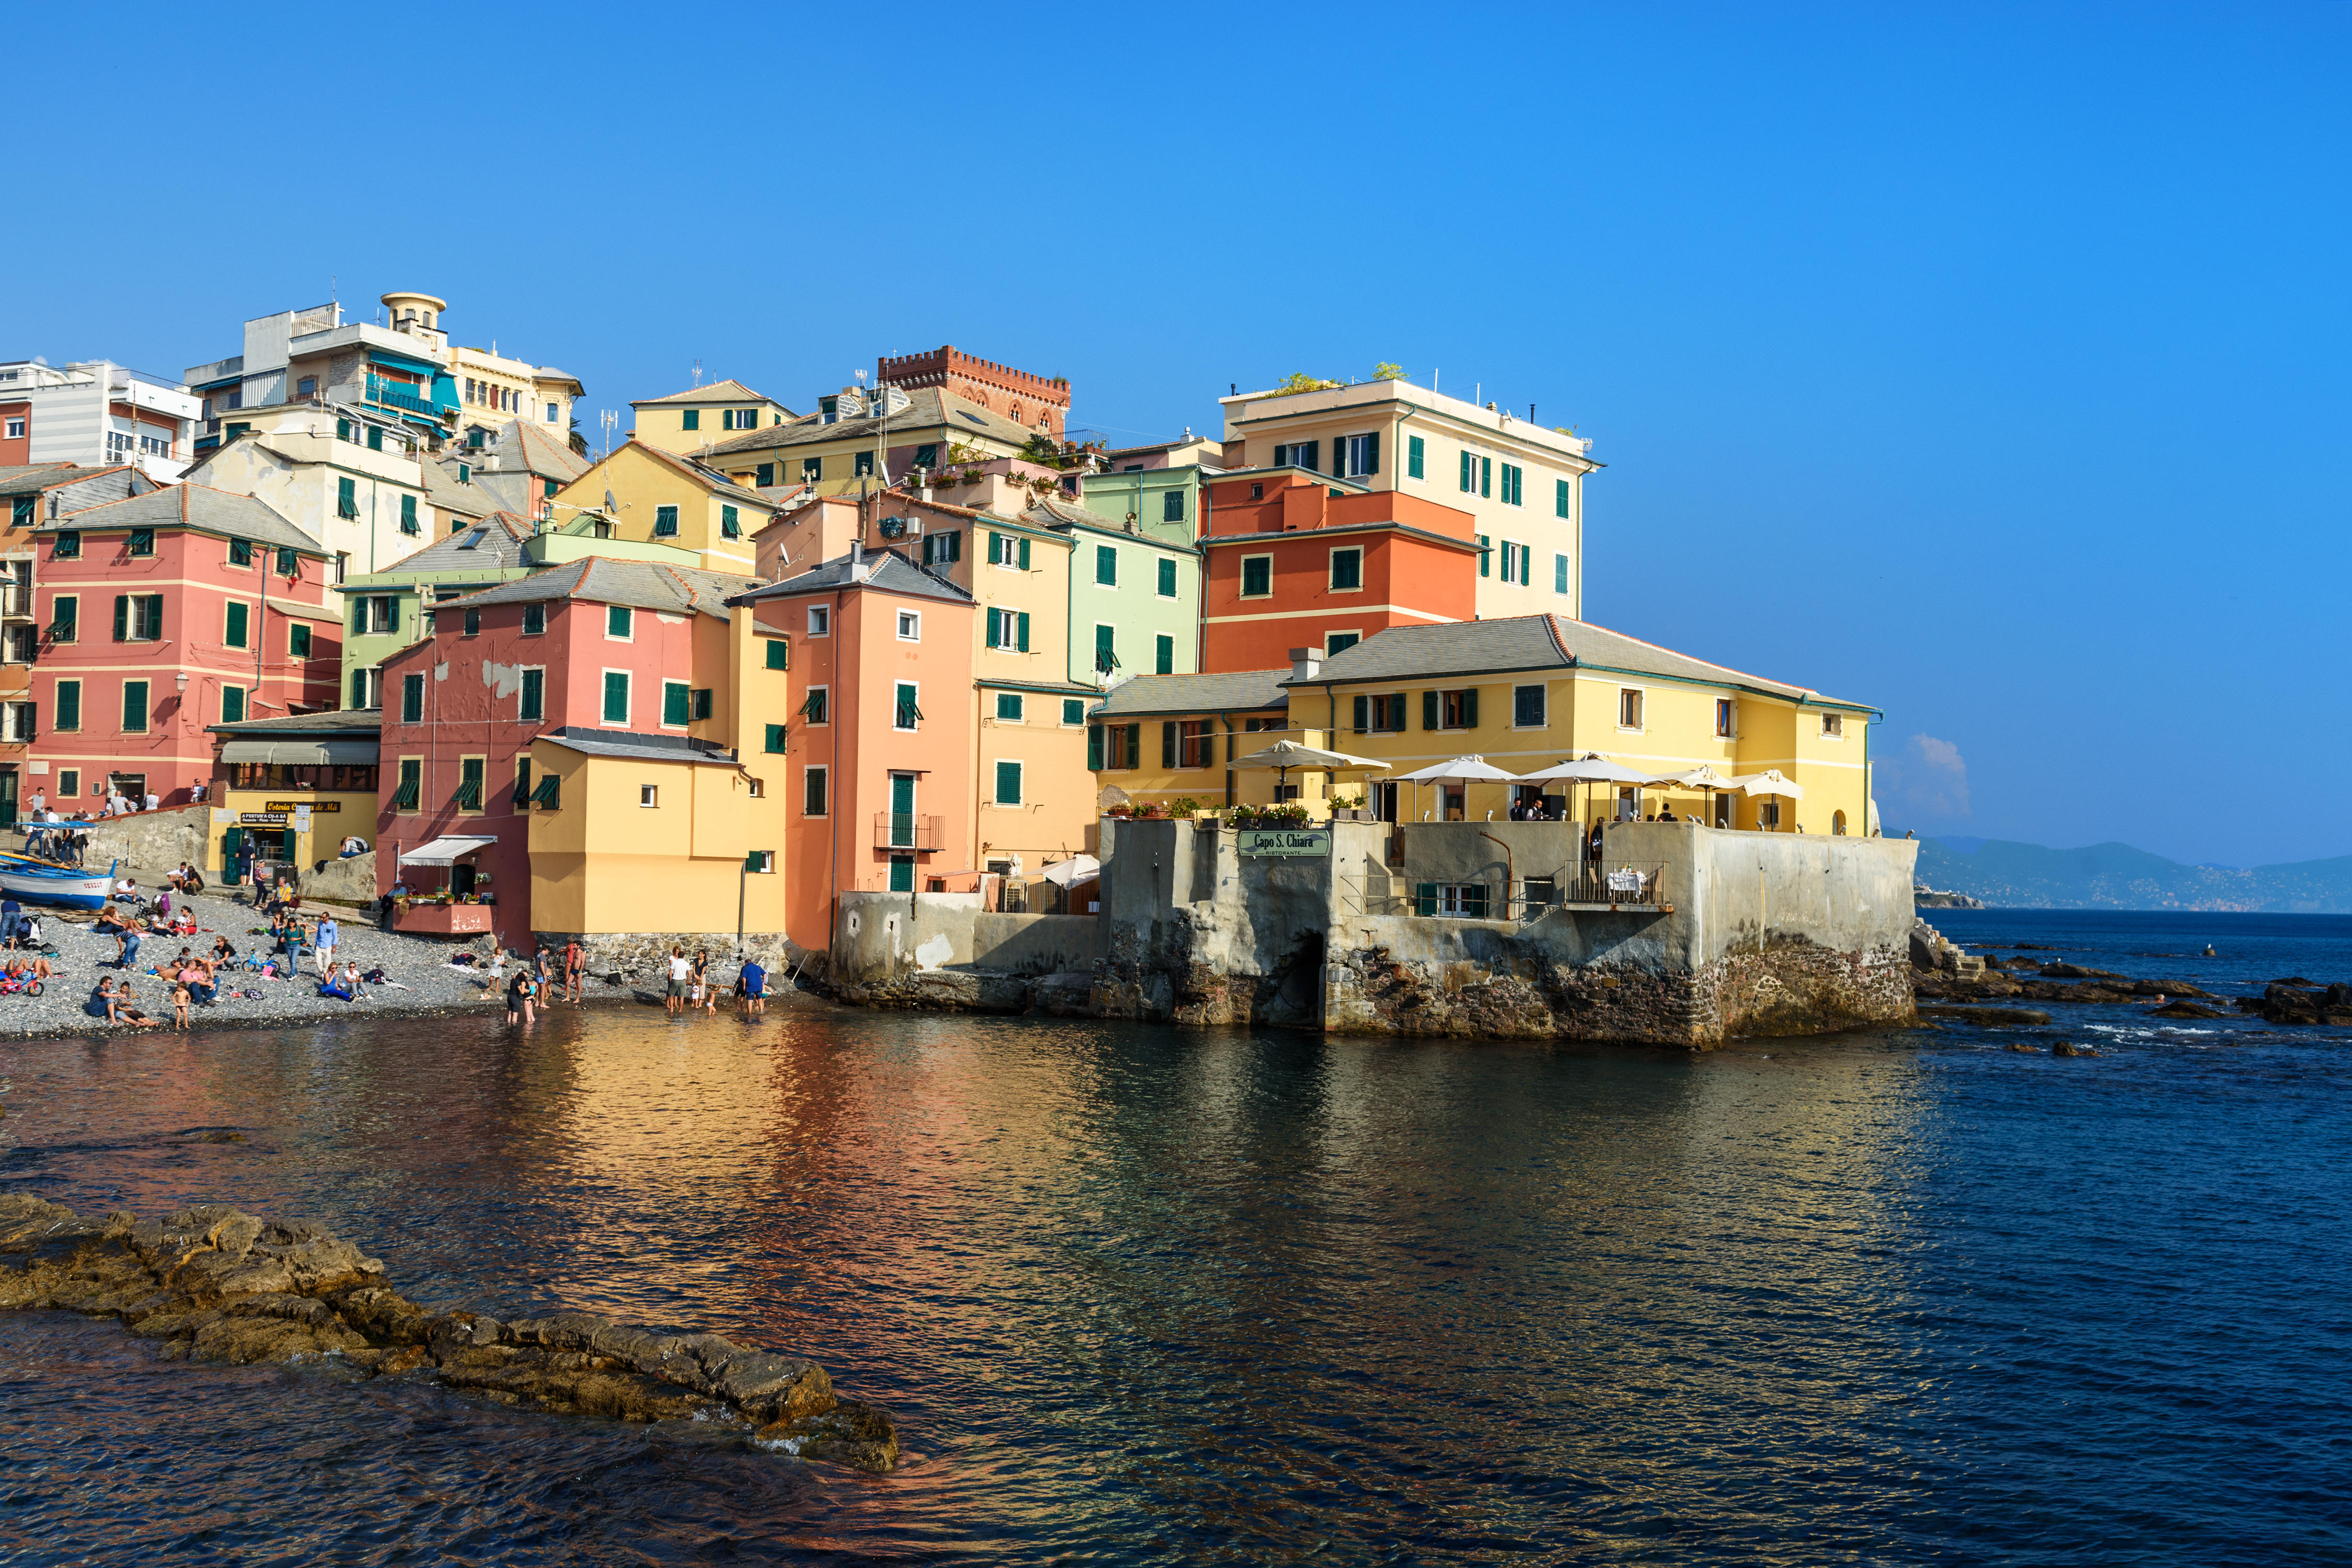 Colorful buildings near the lake in Genoa Italy